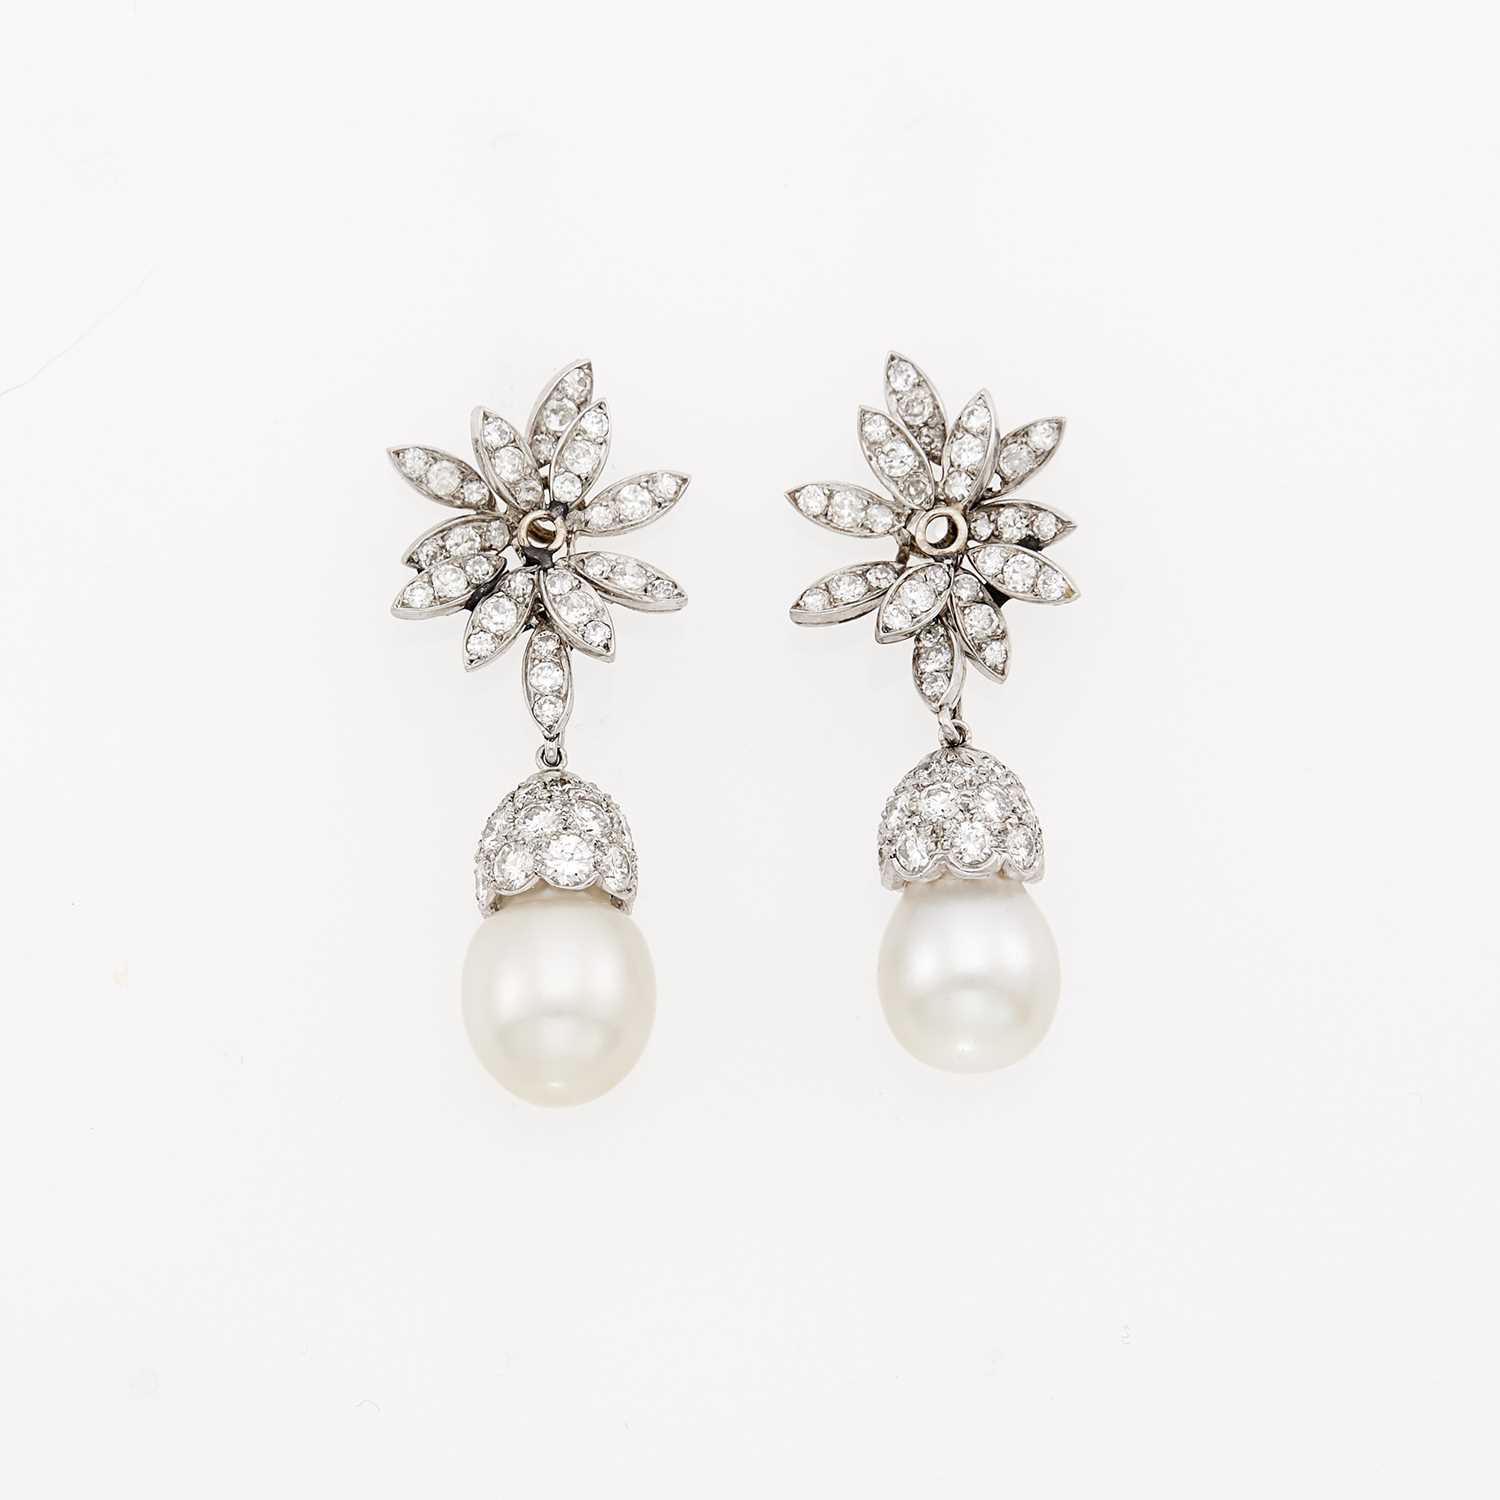 Lot 1067 - Pair of Platinum, White Gold, Cultured Pearl and Diamond Earring Jackets, France, and Pendants